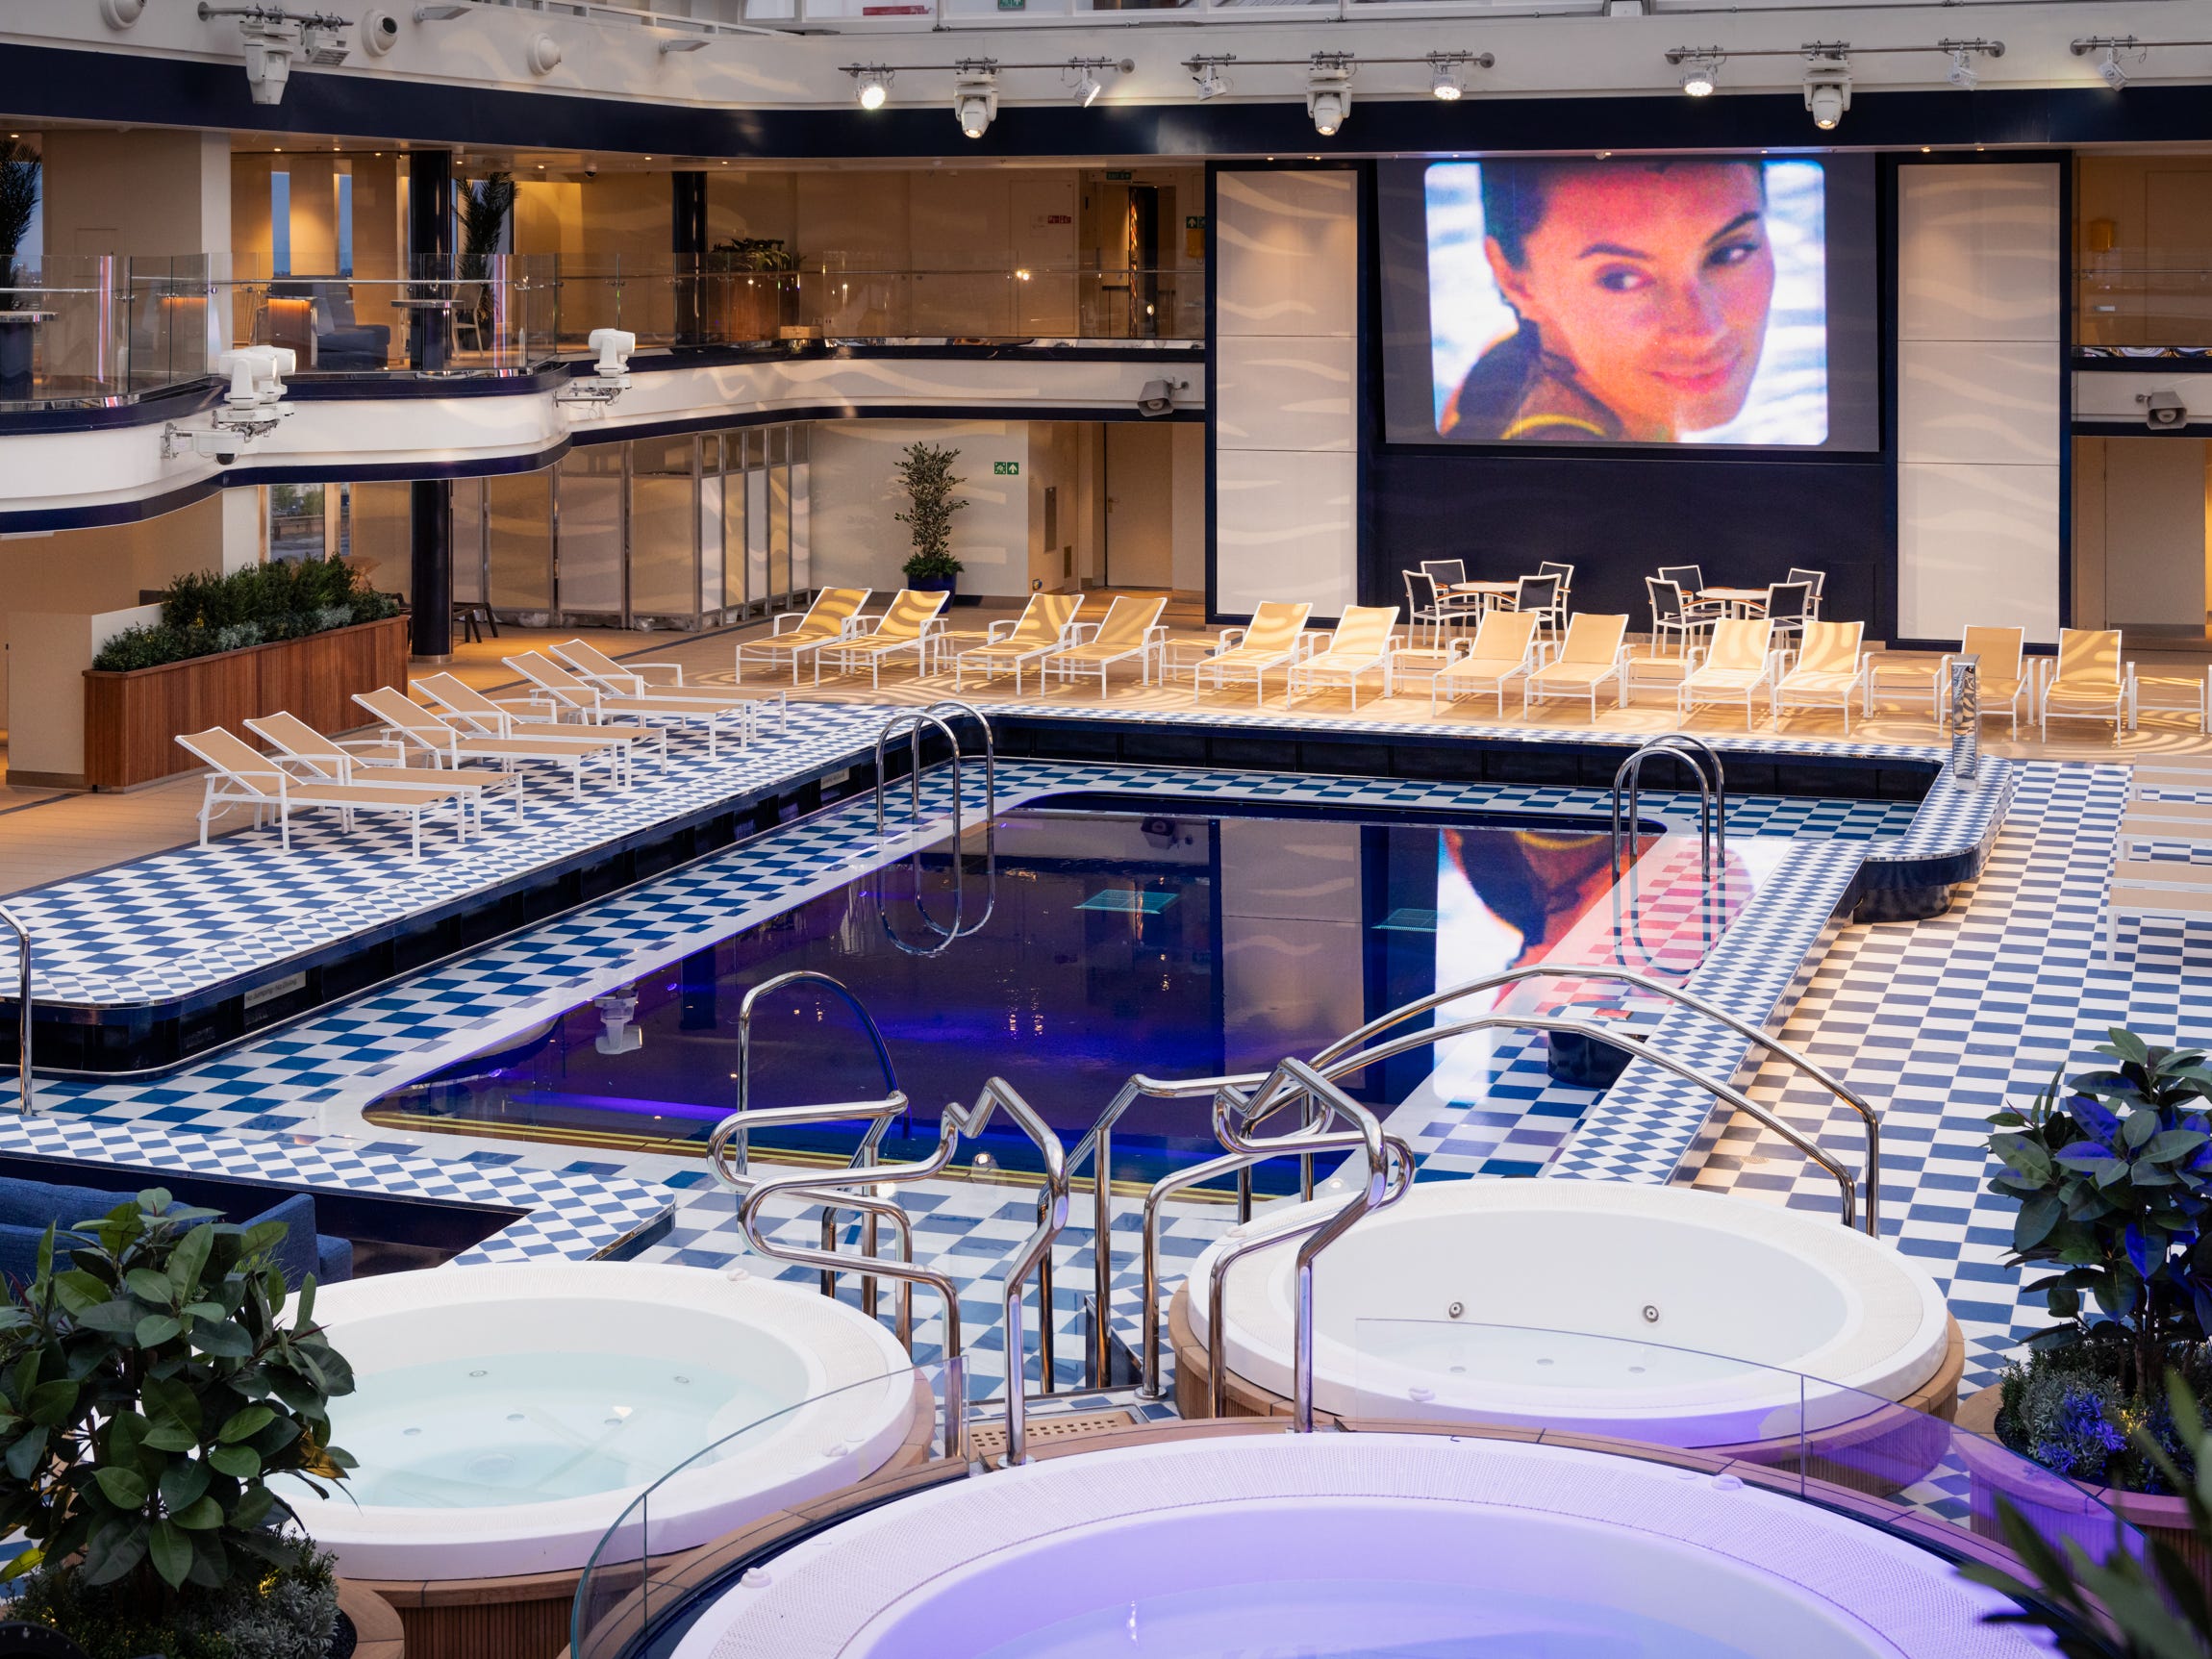 <p><span>For example, the Pavilion. It's one of Queen Anne's go-to places for an afternoon swim, nighttime movie viewing, silent disco, and not-so-silent live music, all under a retractable glass roof.</span></p><p>The ship's pool club also has plenty of lounge seats for a more <a href="https://www.insider.com/oceania-cruises-new-vista-ship-review-luxury-2023-10">traditional pool deck</a> experience. For something indoors, head to the drawing and game rooms instead. </p>